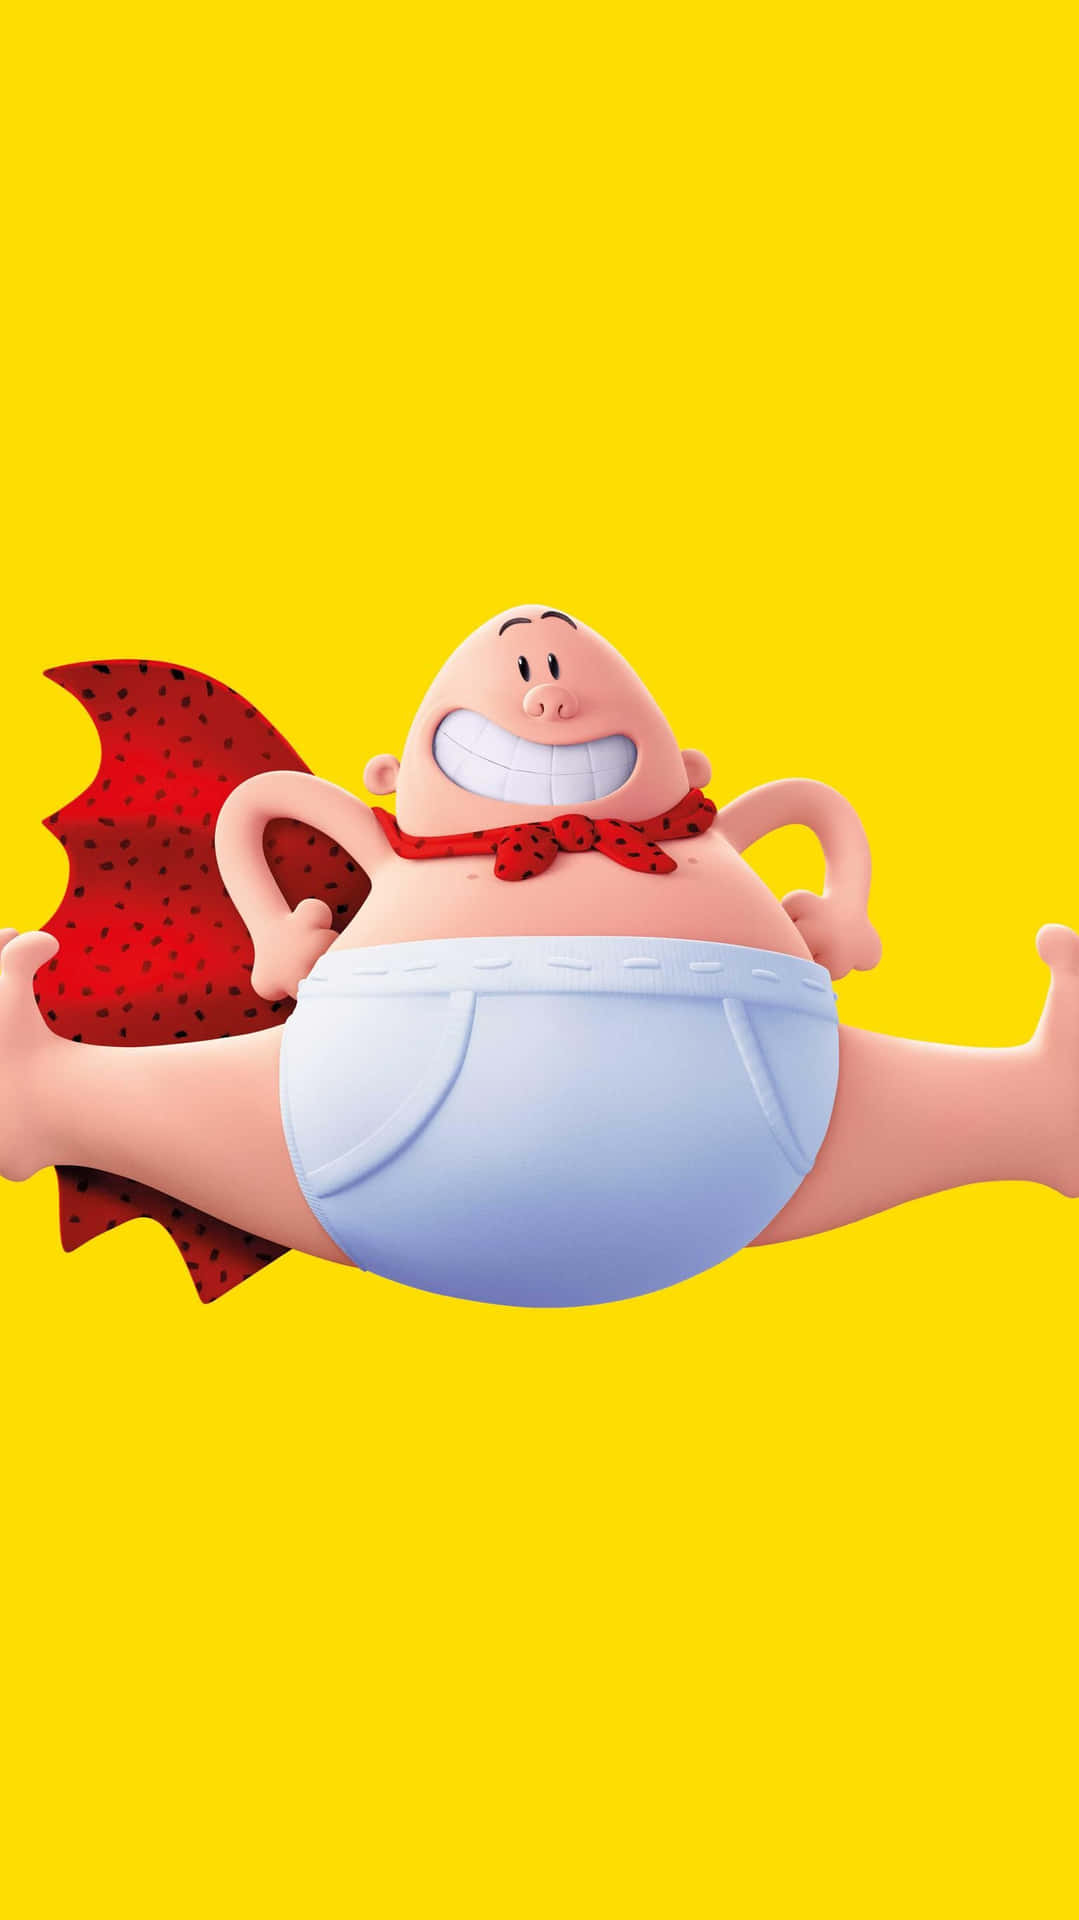 Splitting Midair Captain Underpants: The First Epic Movie Wallpaper